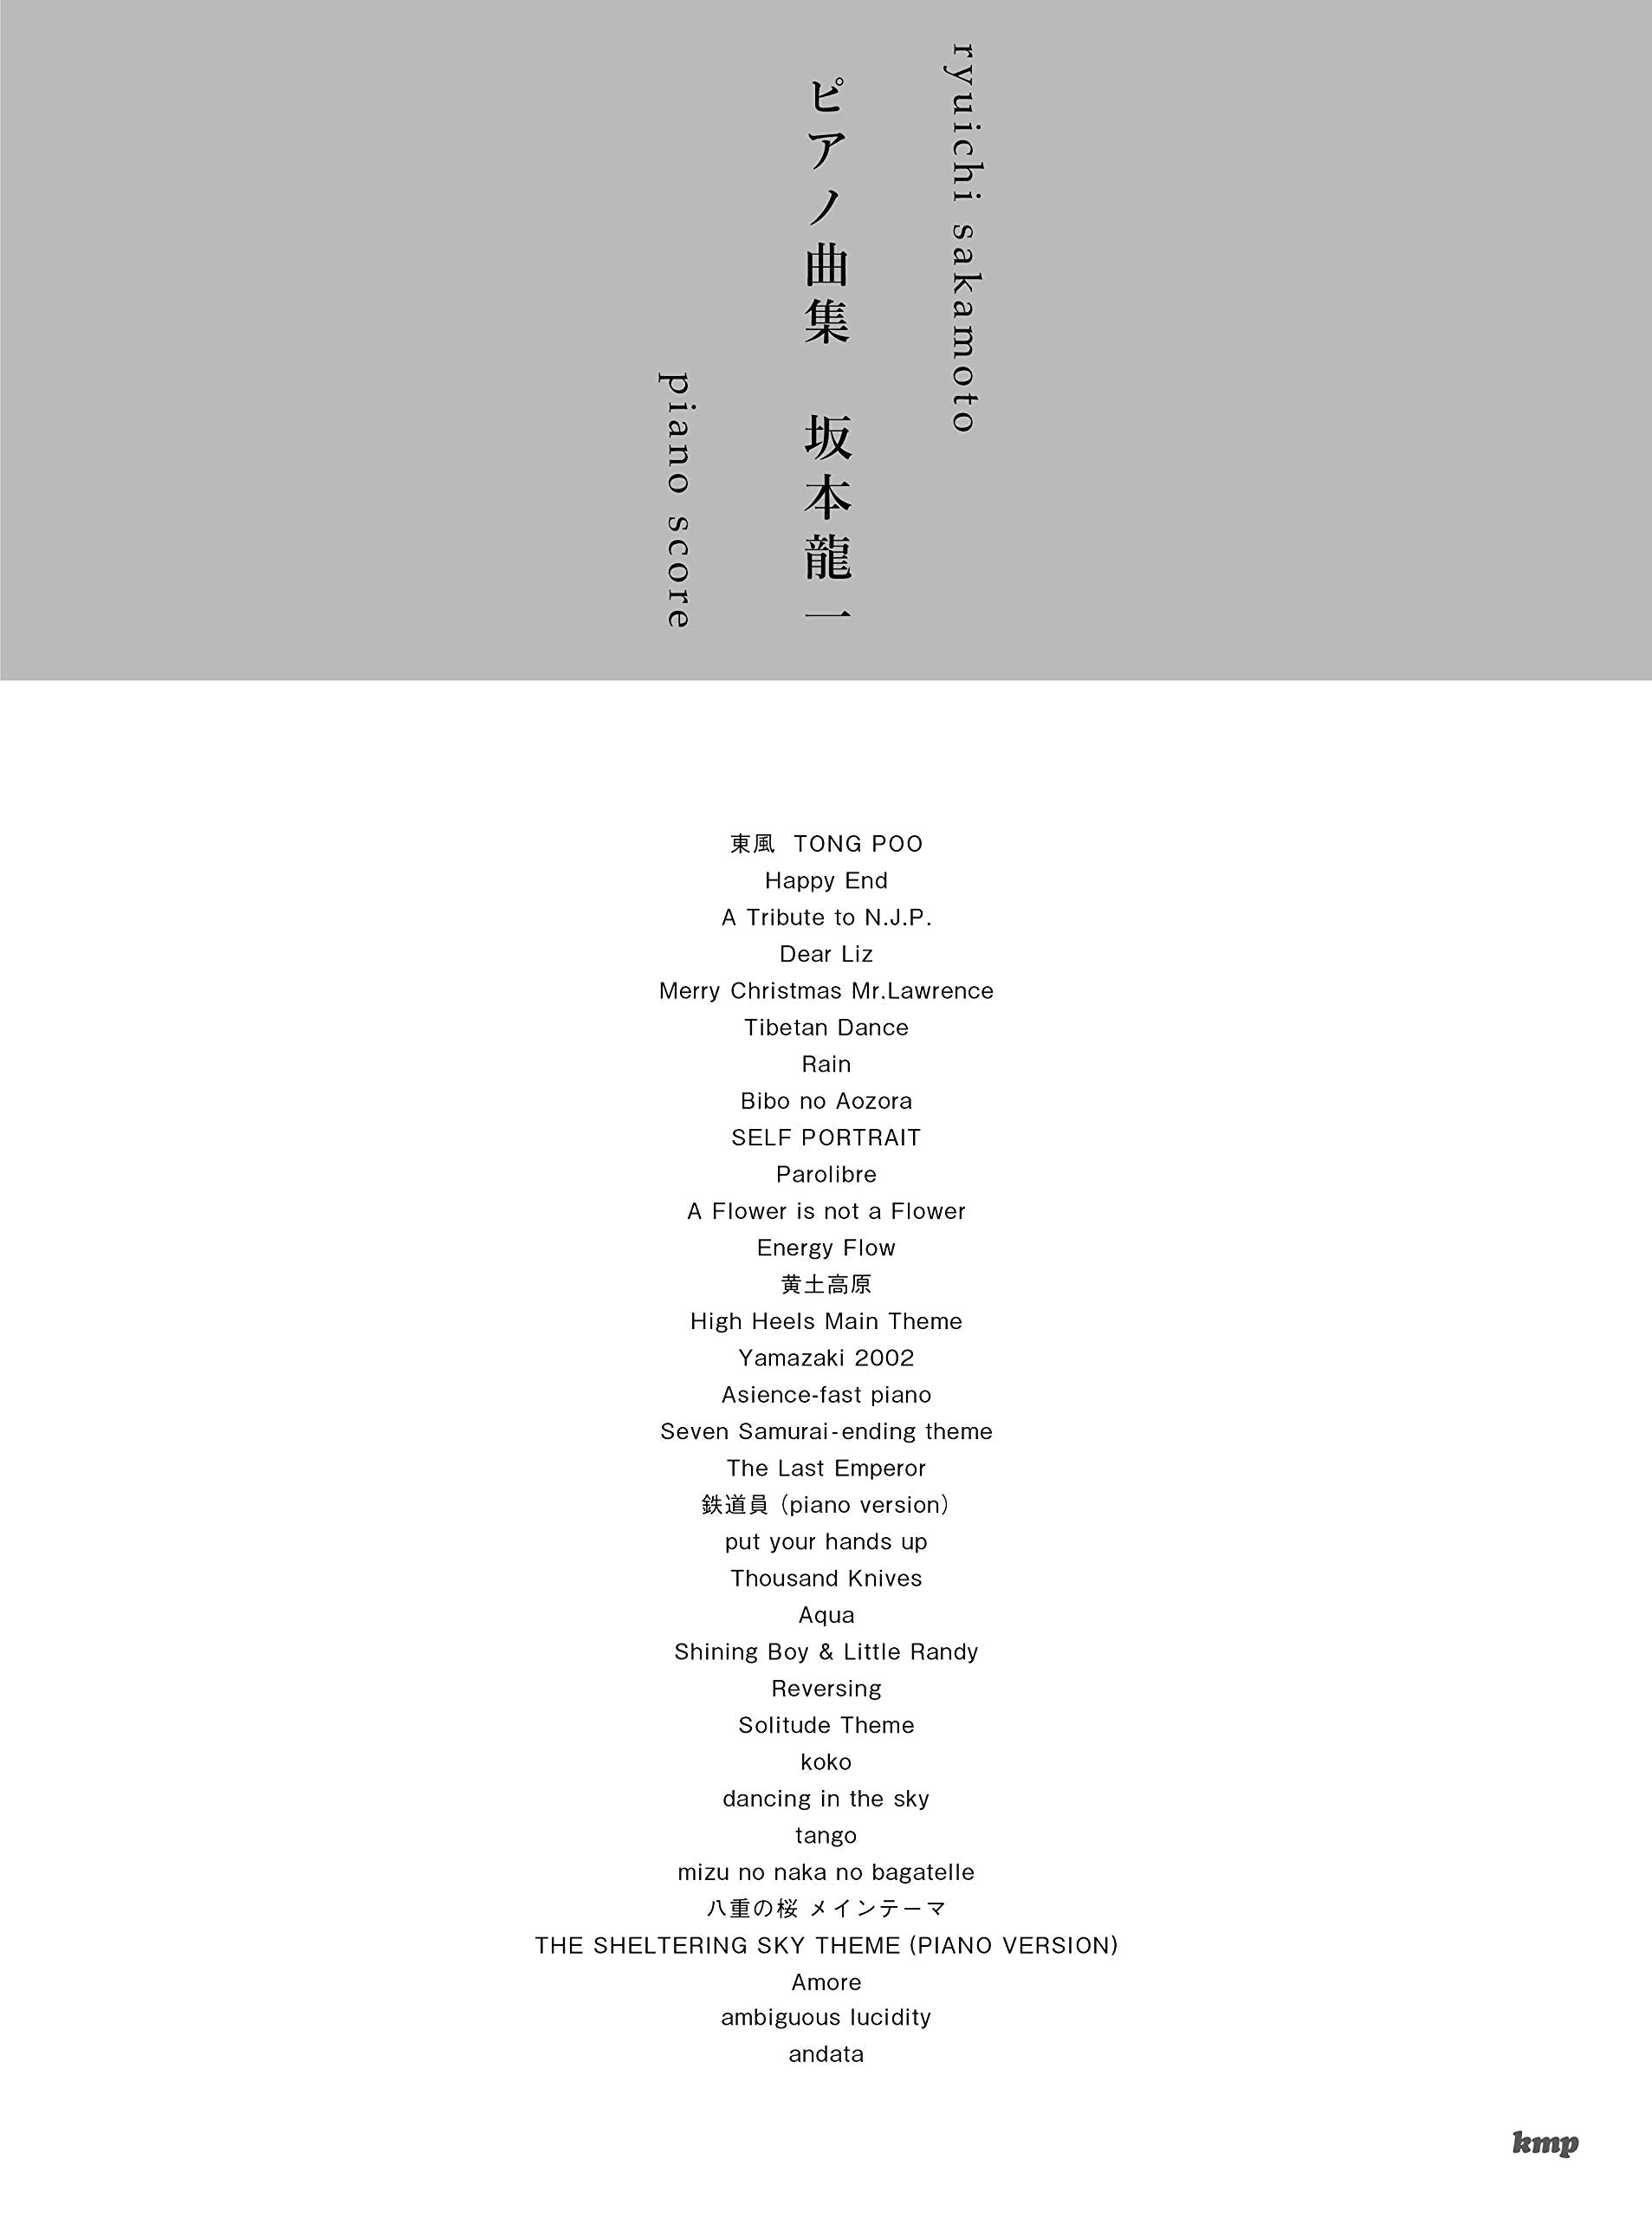 The collection of Ryuichi Sakamoto songs for Advanced Piano Solo